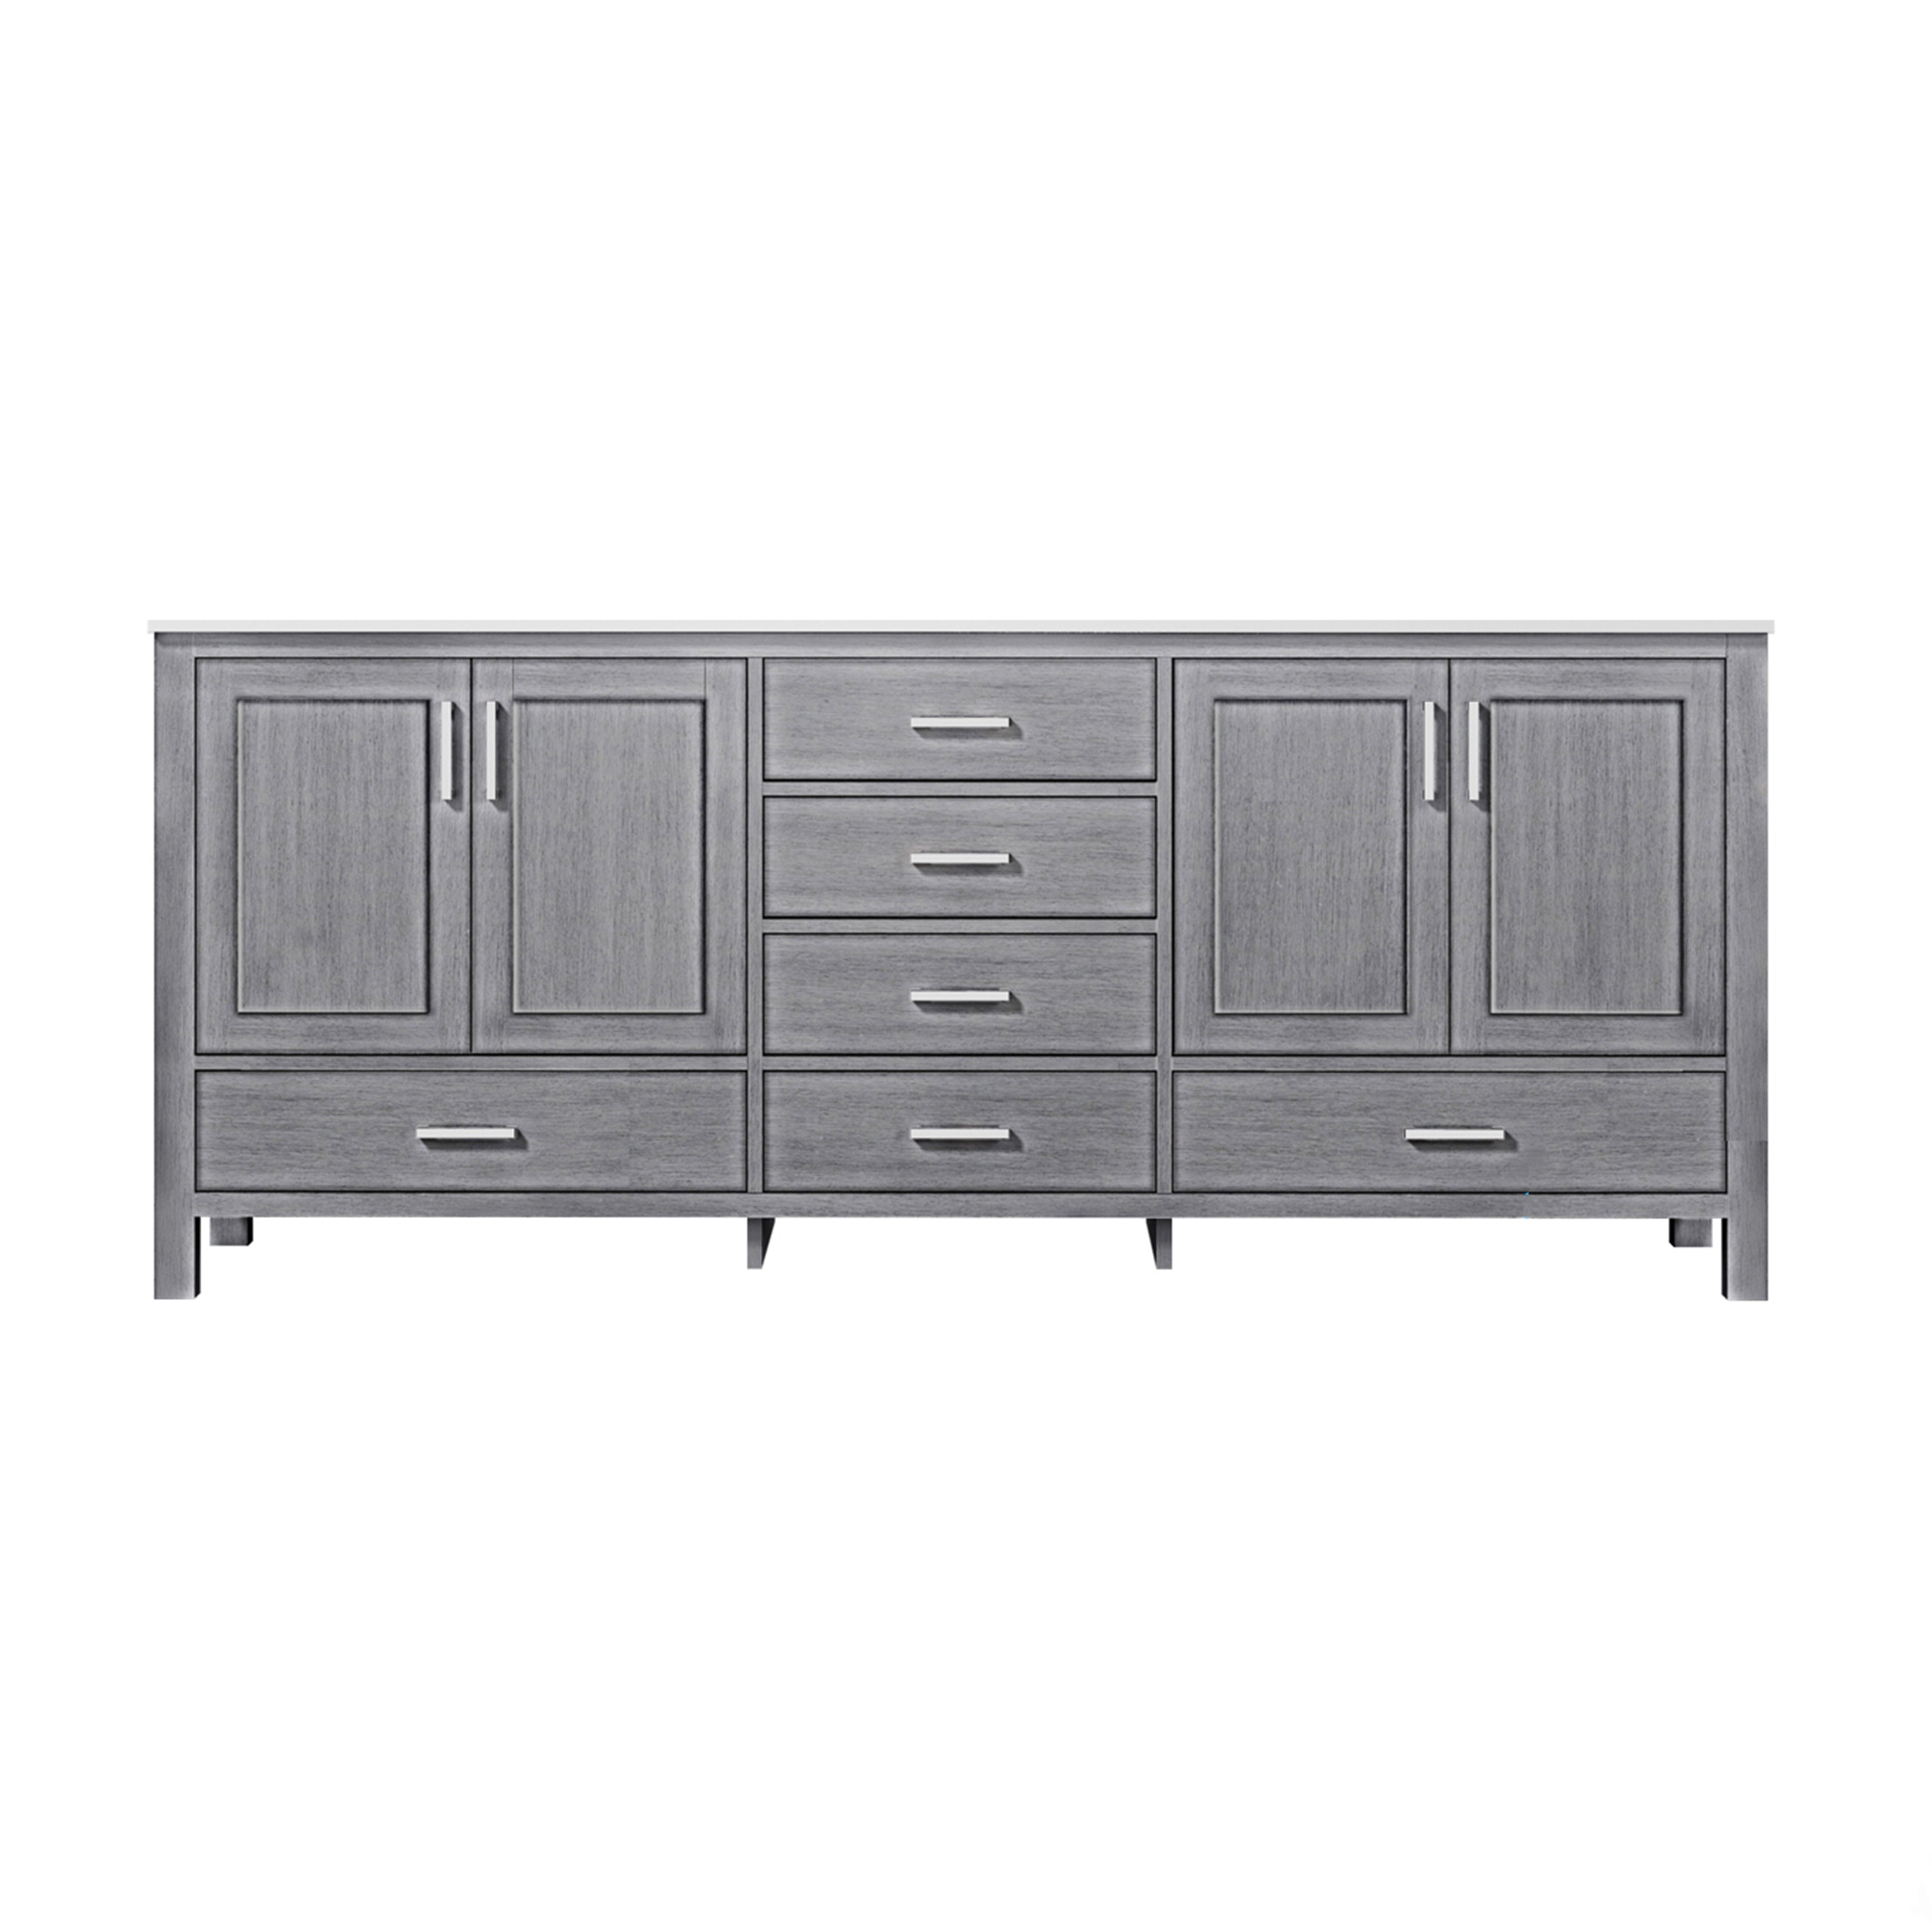 Lexora Jacques LJ342280DDDS000 80" Double Bathroom Vanity in Distressed Grey with White Carrara Marble, White Rectangle Sinks, Front View